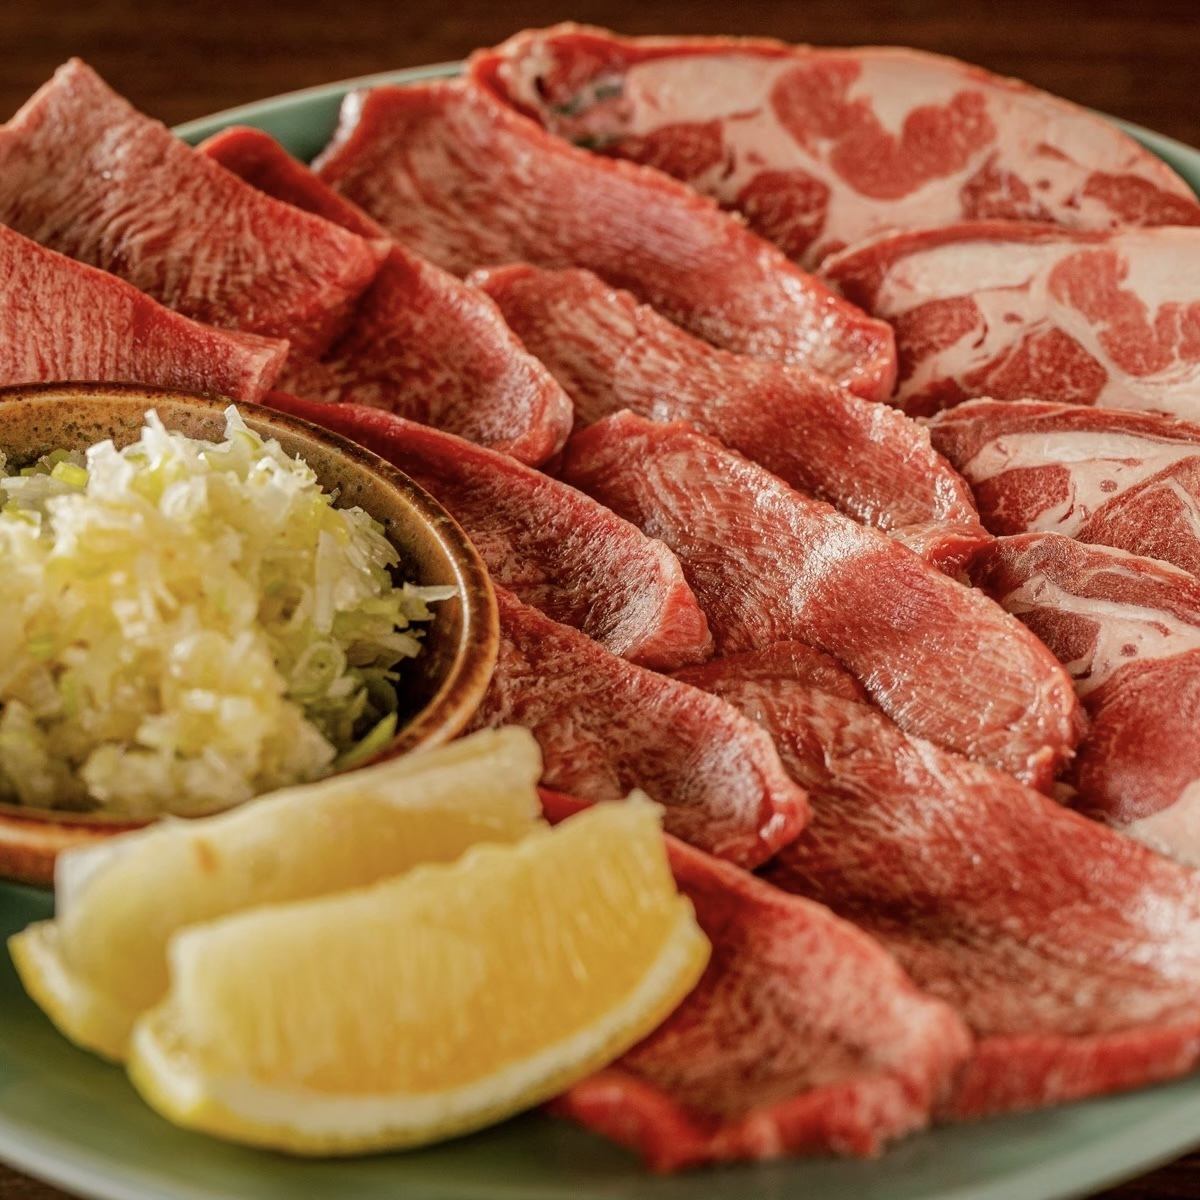 Enjoy the three major specialties, including a full plate of raw beef tongue that has not been frozen!